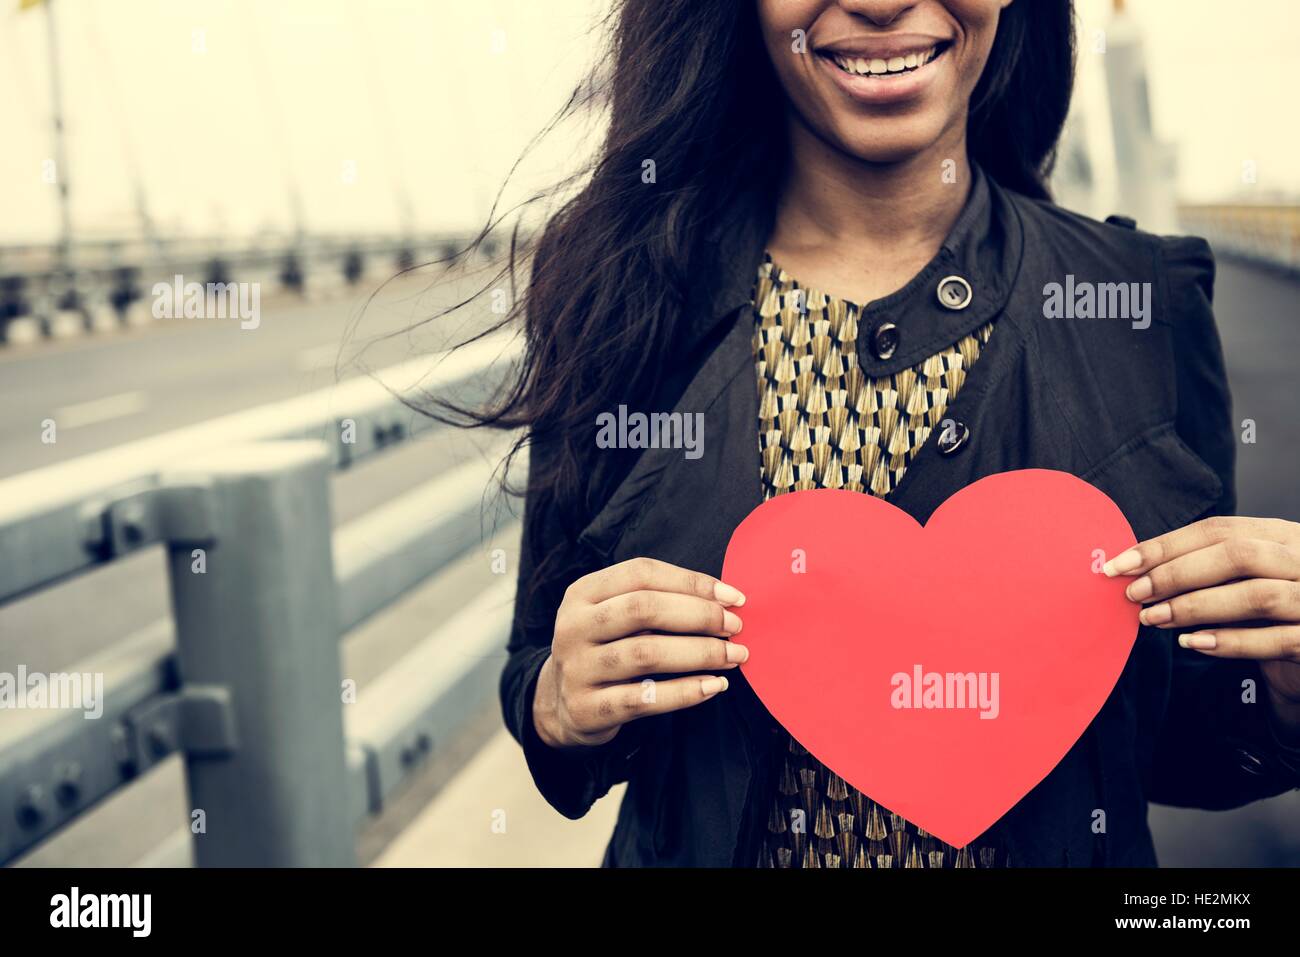 African Woman Holding Heart Shape Symbol Love Concept Stock Photo